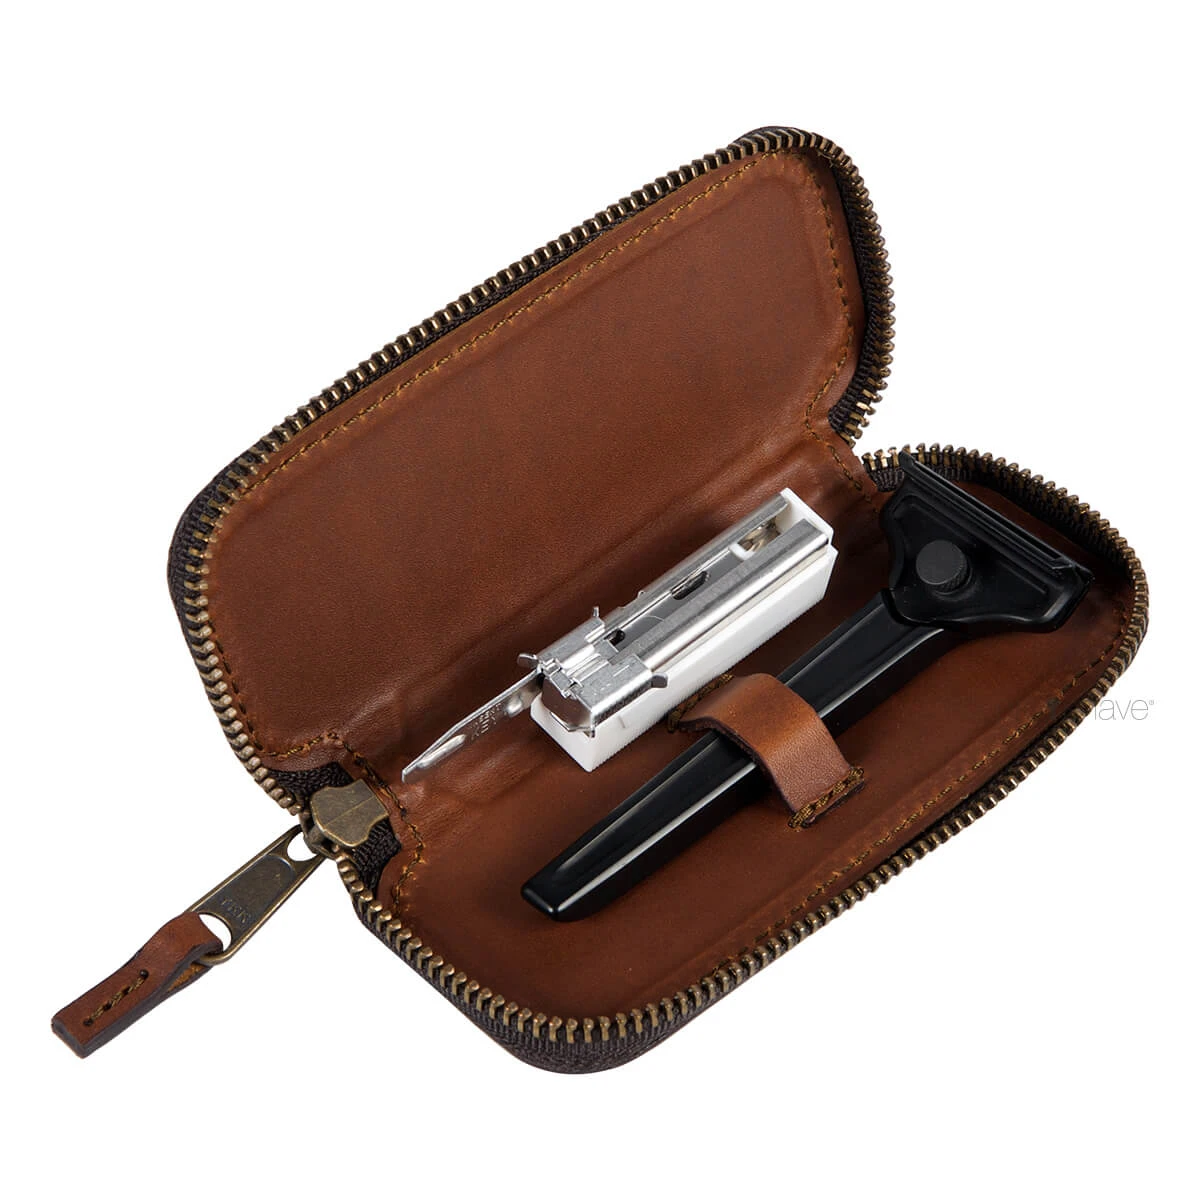 Travel Case for razor in bourbon leather from Supply